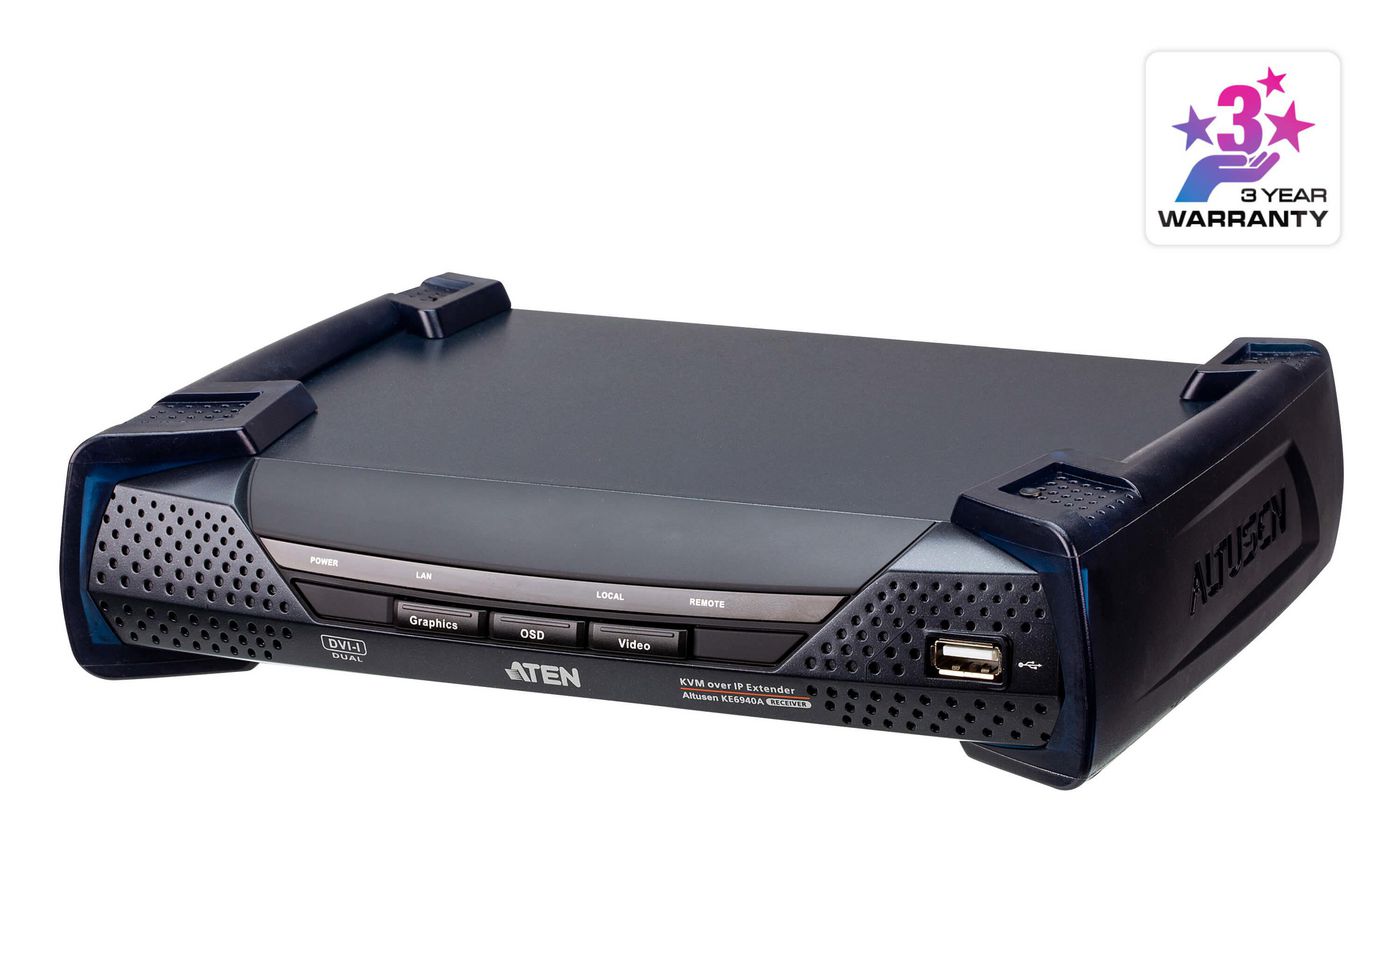 [PREMIUM] Aten USB DVI-I Dual Display KVM over IPReceiver with USB Peripheral Support  Power/LAN Red